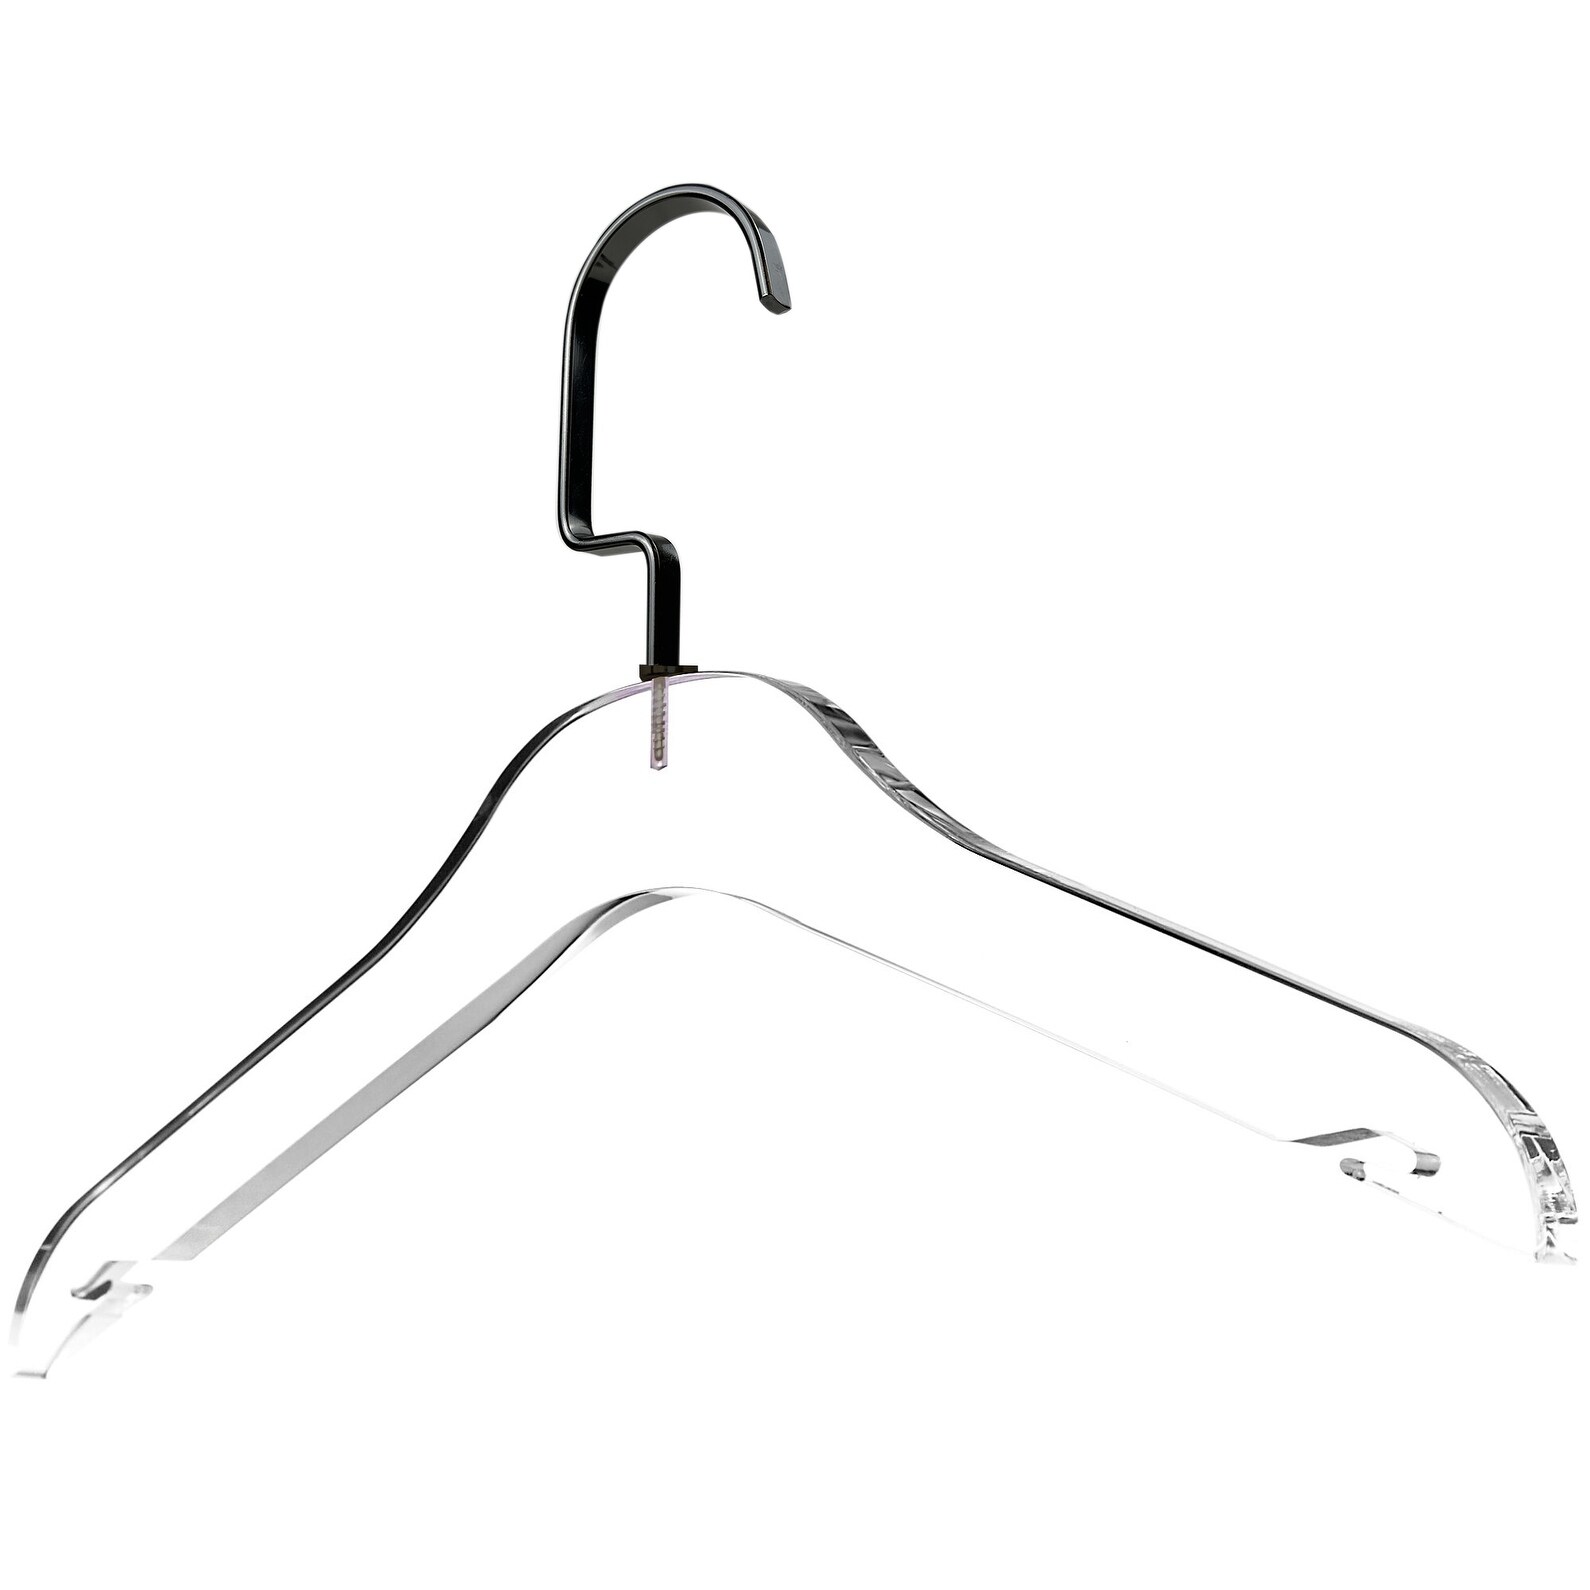 https://ak1.ostkcdn.com/images/products/is/images/direct/10a4a8b0f8a5a3ed7b51c6318285a79c992d41a5/DesignStyles-Clear-Acrylic-Clothes-Hangers---10-Pk.jpg